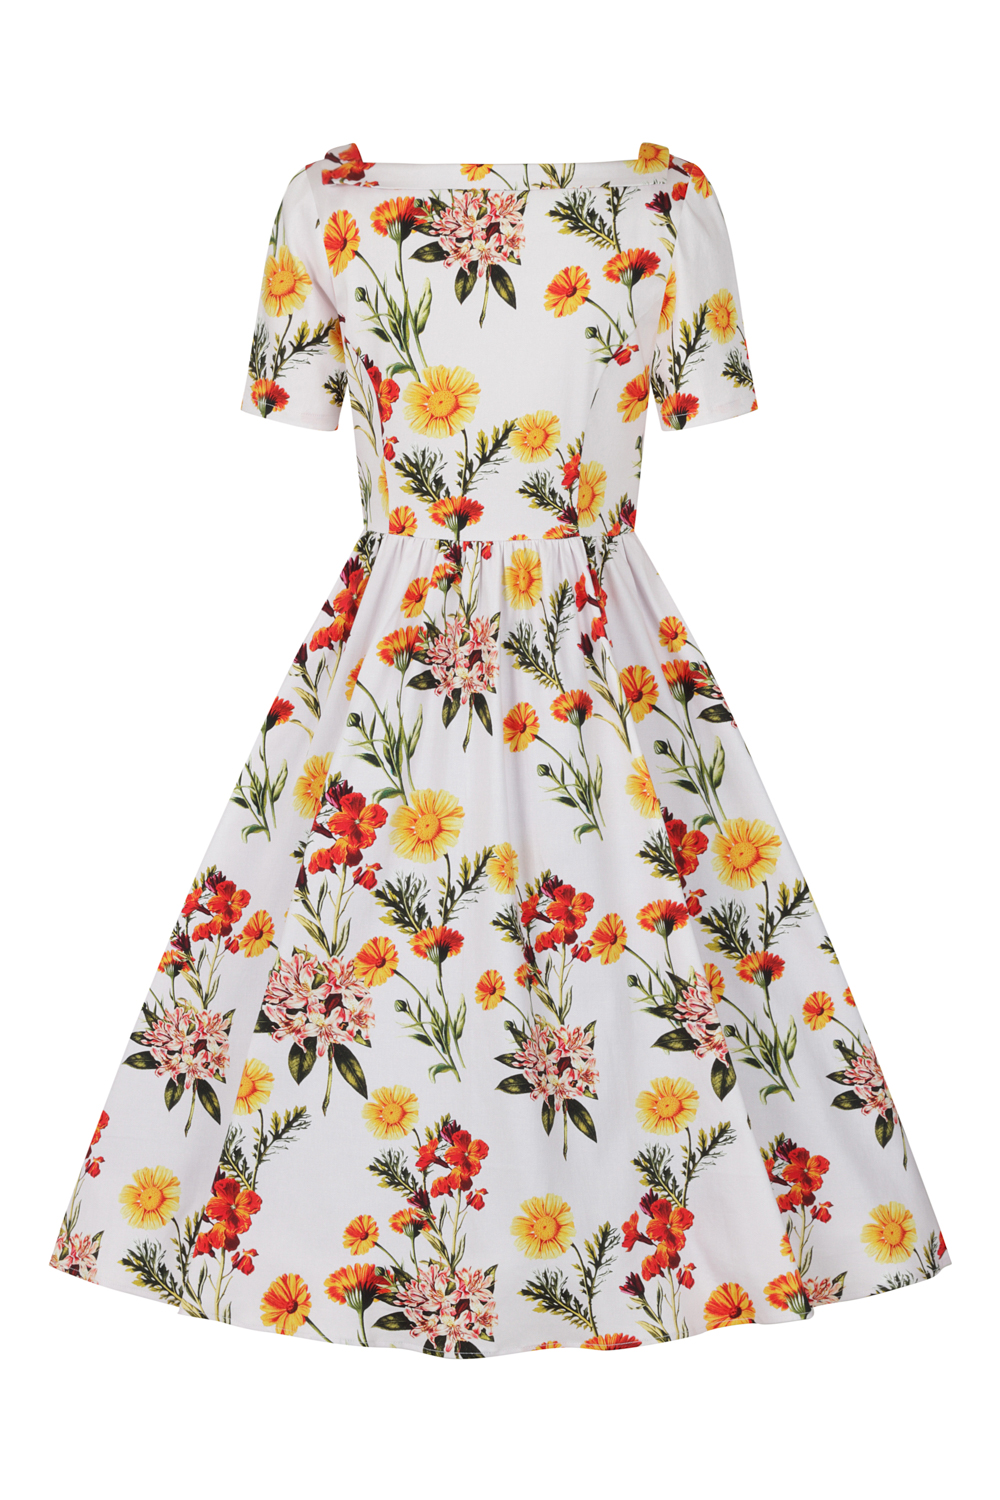 Sunflower Floral Swing Dress in white - Hearts & Roses London